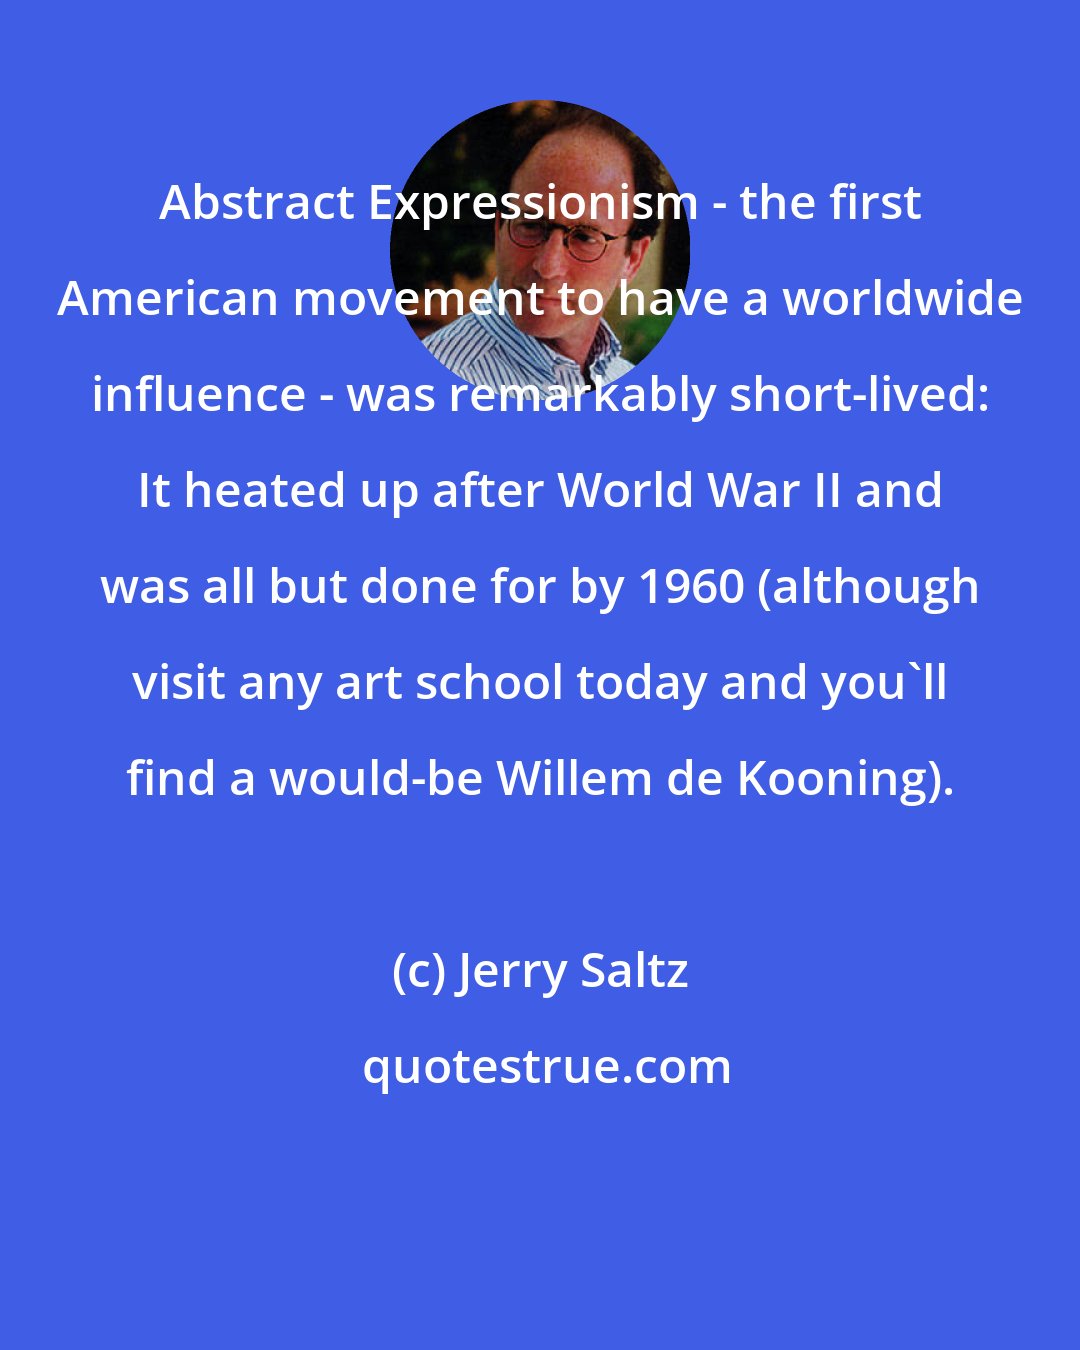 Jerry Saltz: Abstract Expressionism - the first American movement to have a worldwide influence - was remarkably short-lived: It heated up after World War II and was all but done for by 1960 (although visit any art school today and you'll find a would-be Willem de Kooning).